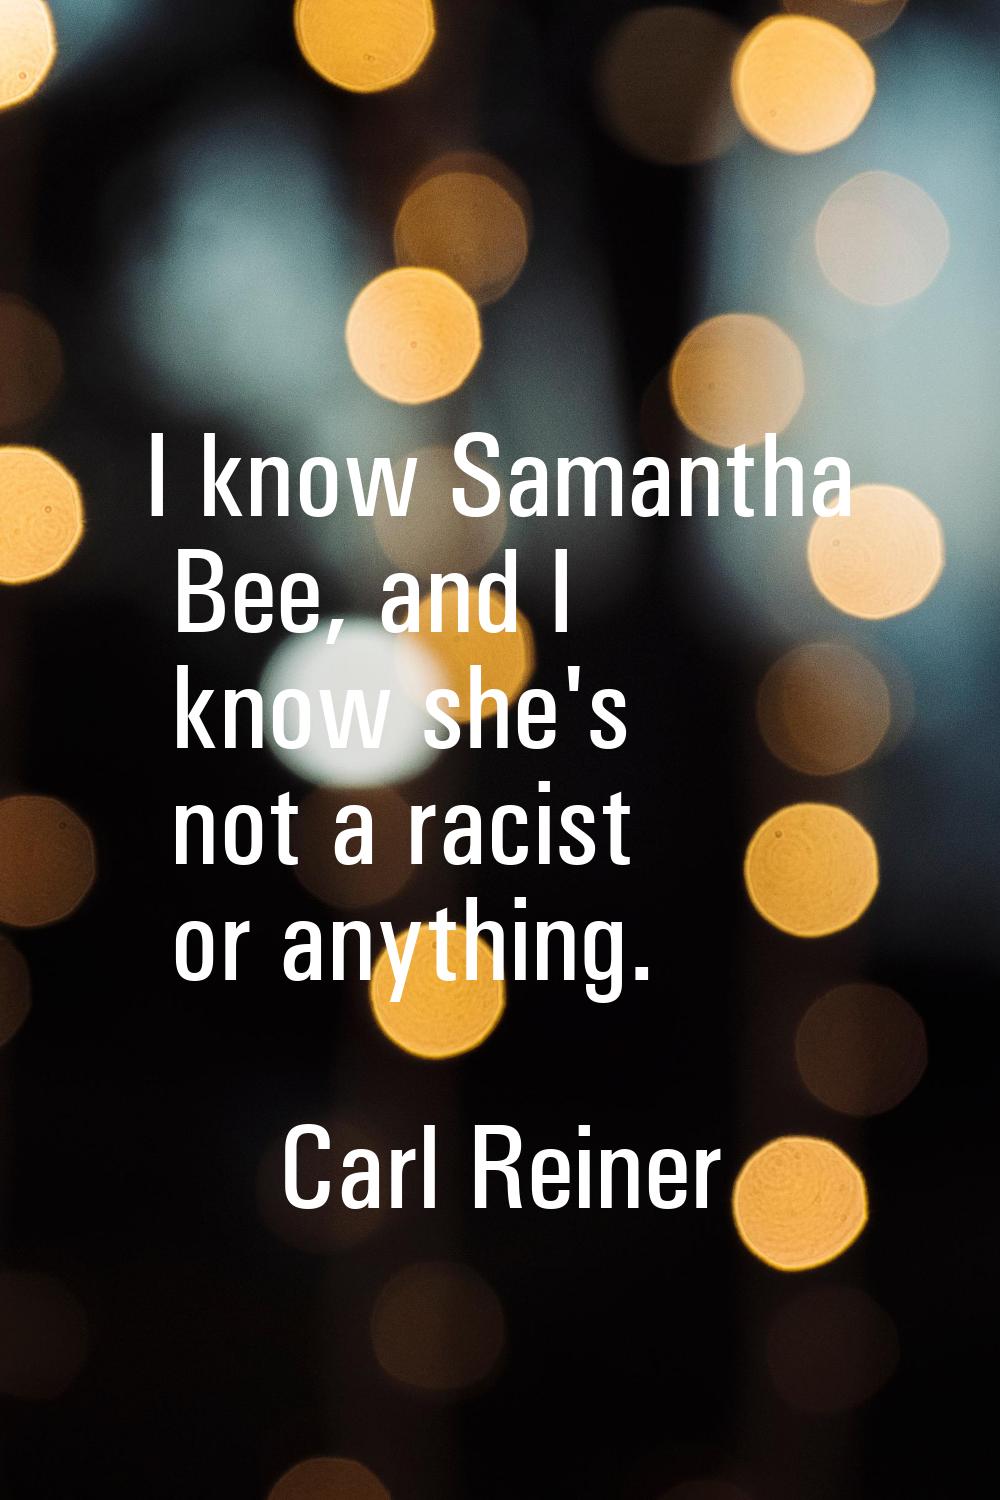 I know Samantha Bee, and I know she's not a racist or anything.